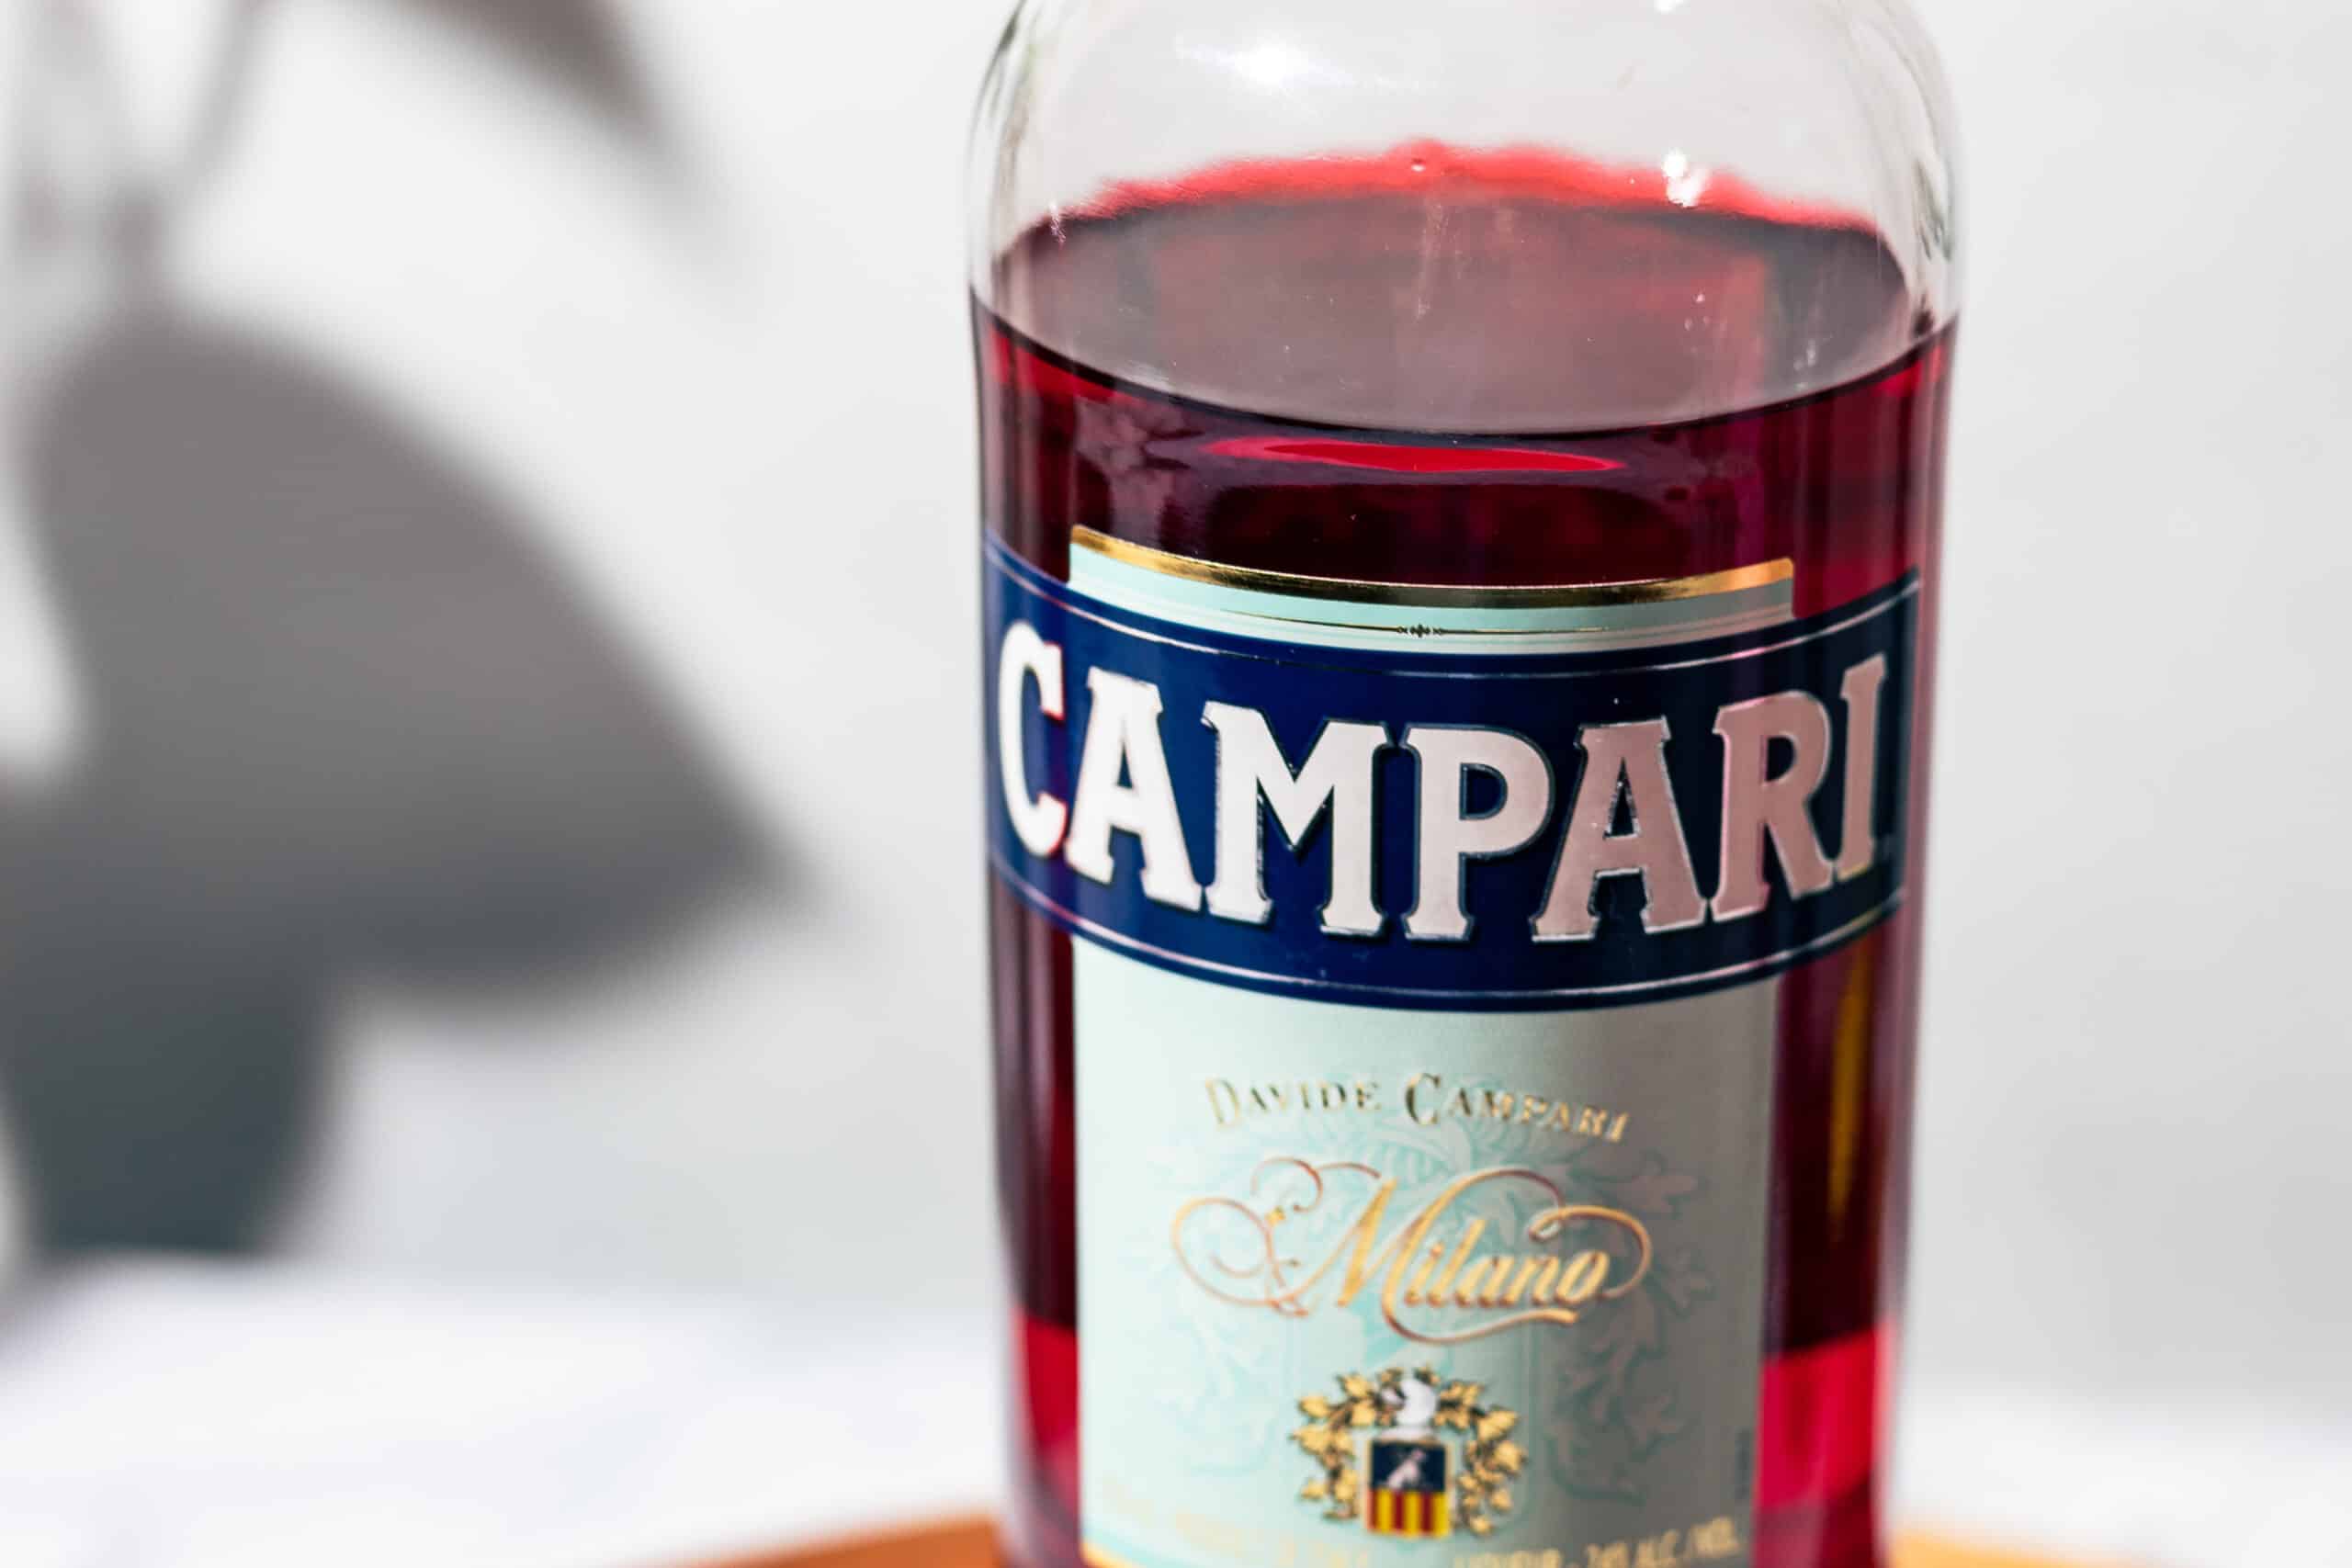 Campari bottle with traditional label. 